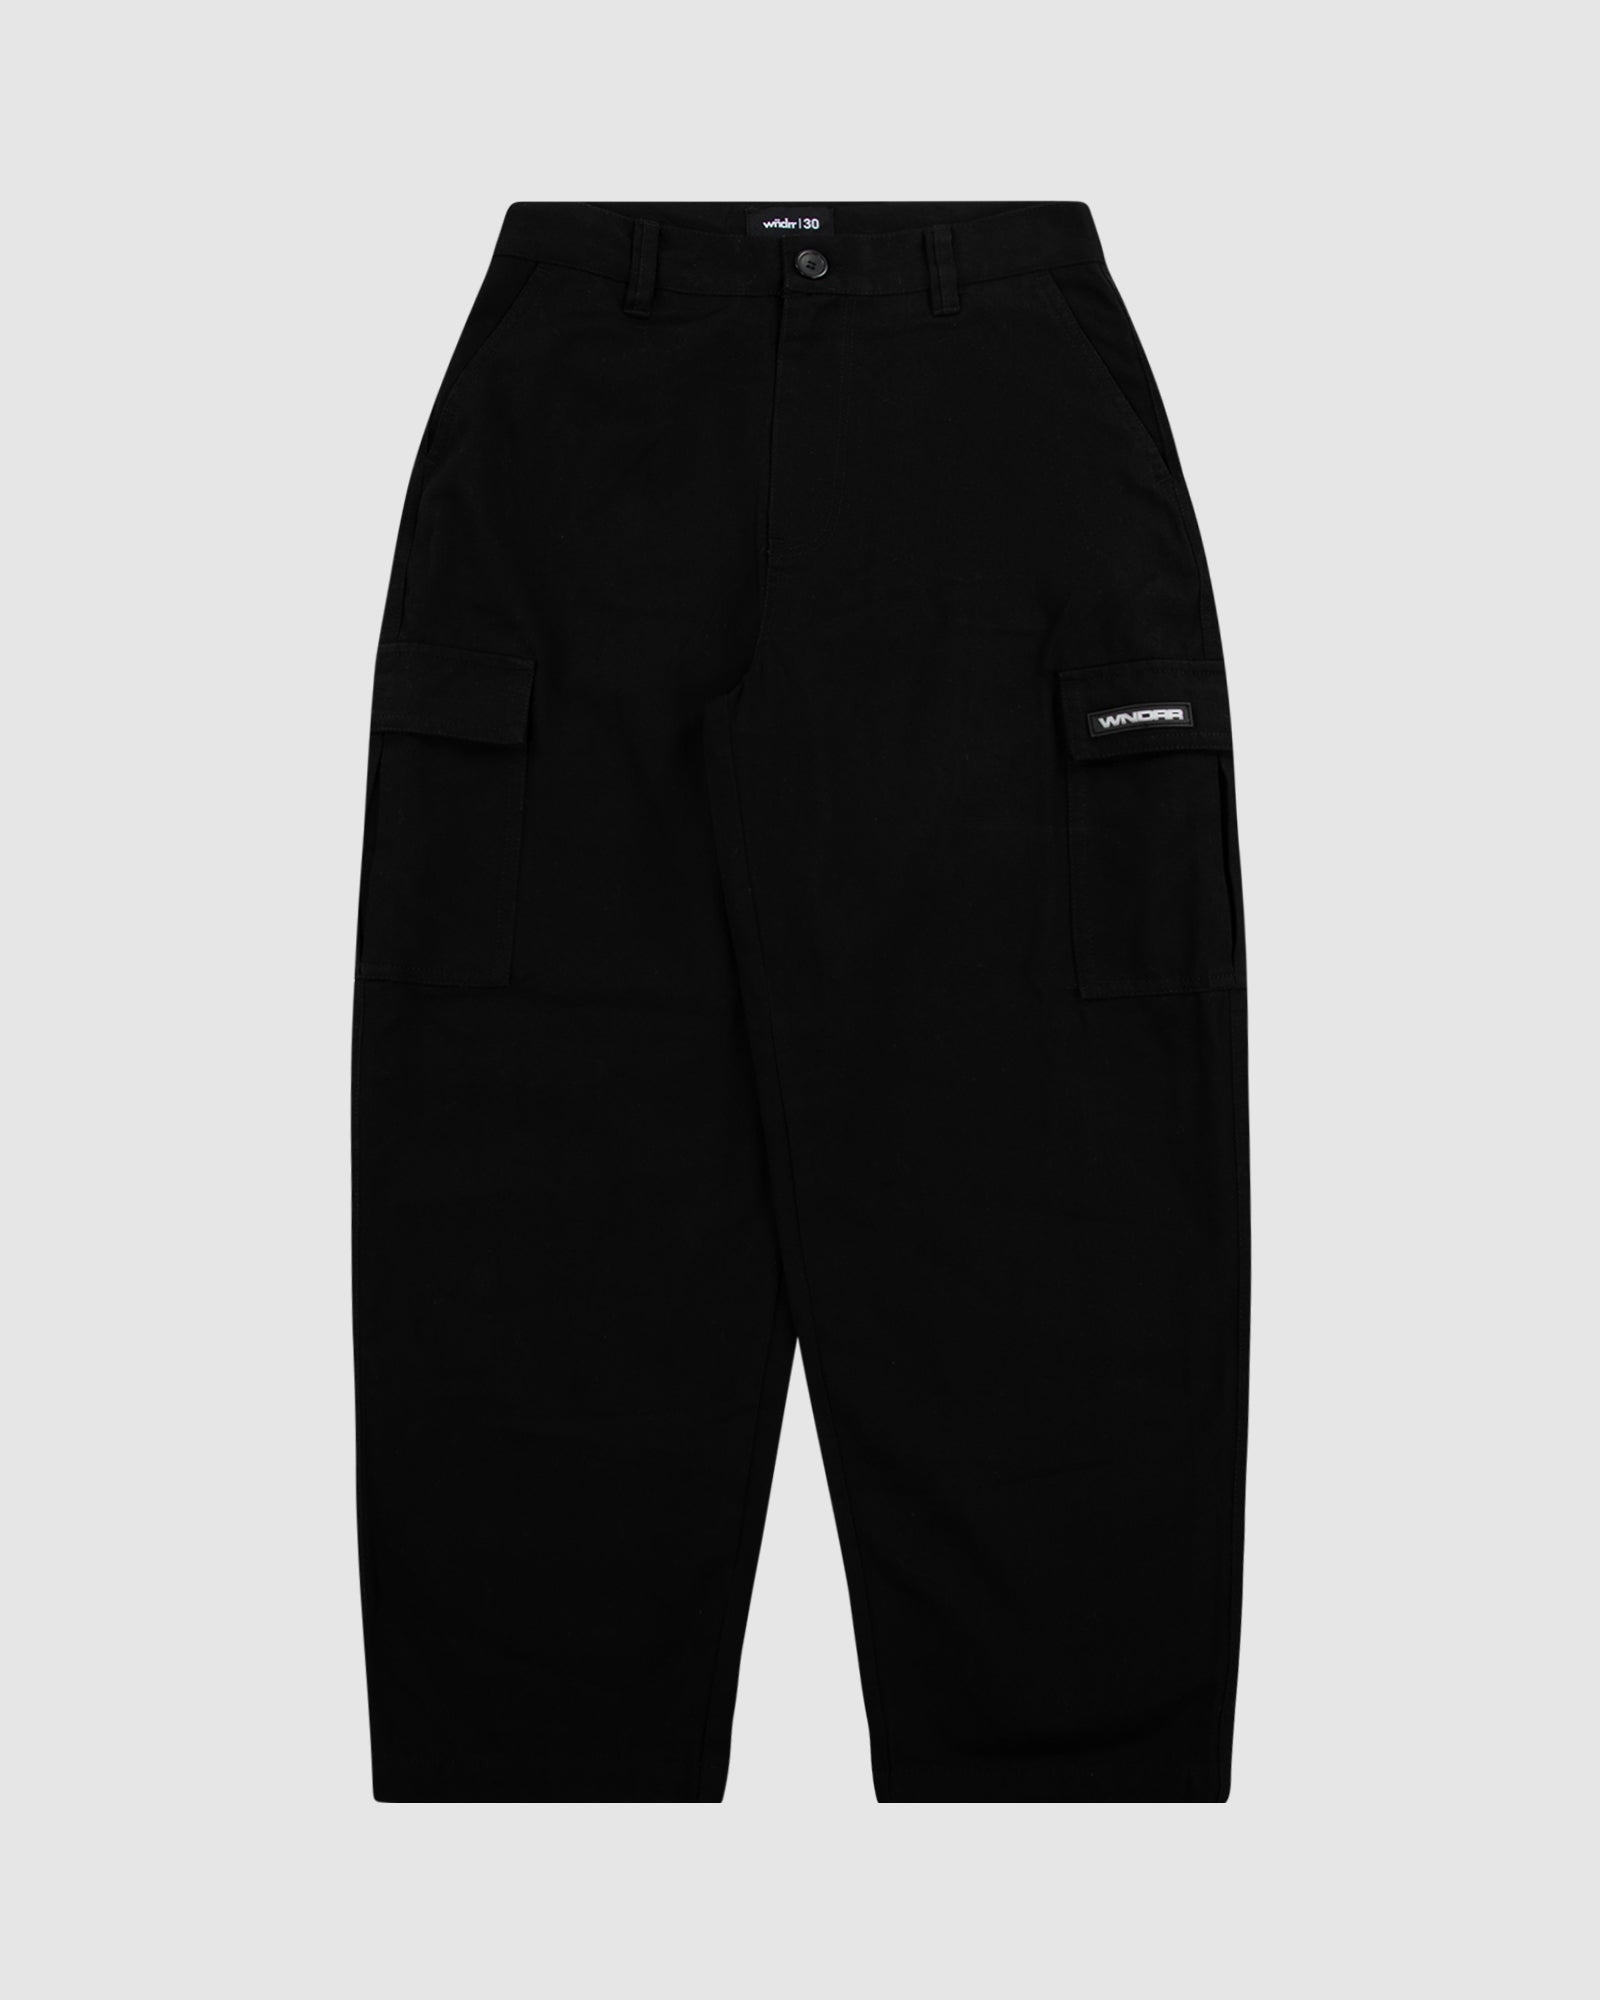 BOOSTER CARGO PANT - BLACK